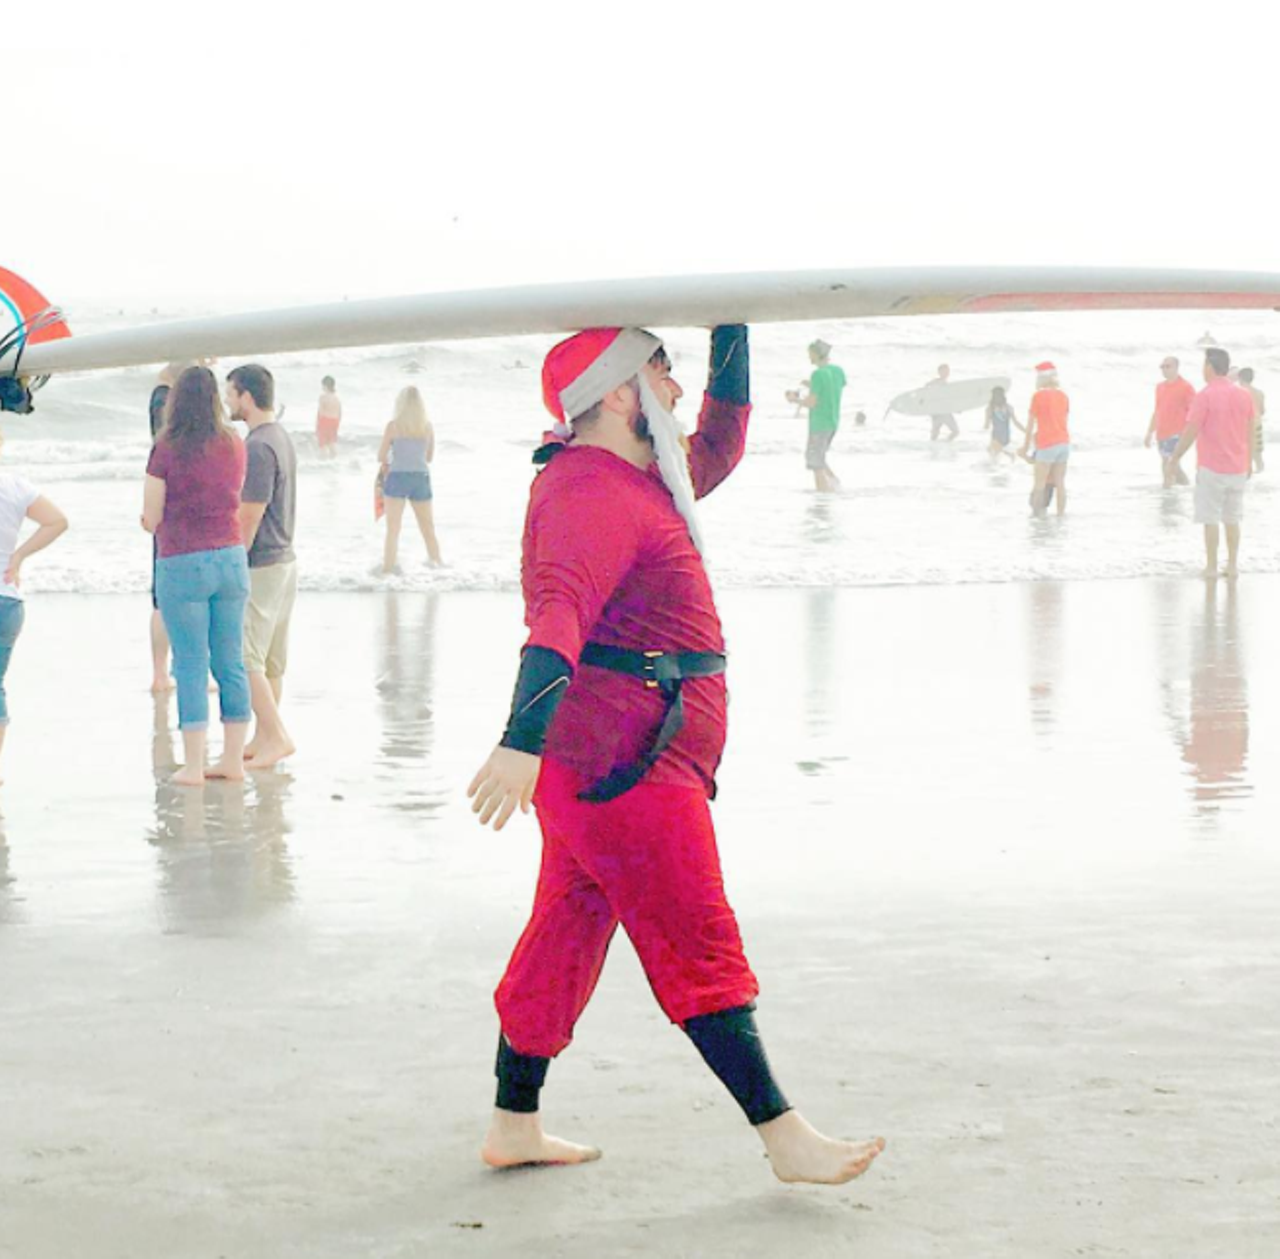 Santas don&#146;t have sleighs, they have surf boards
Photo via kittyupgirl/Instagram